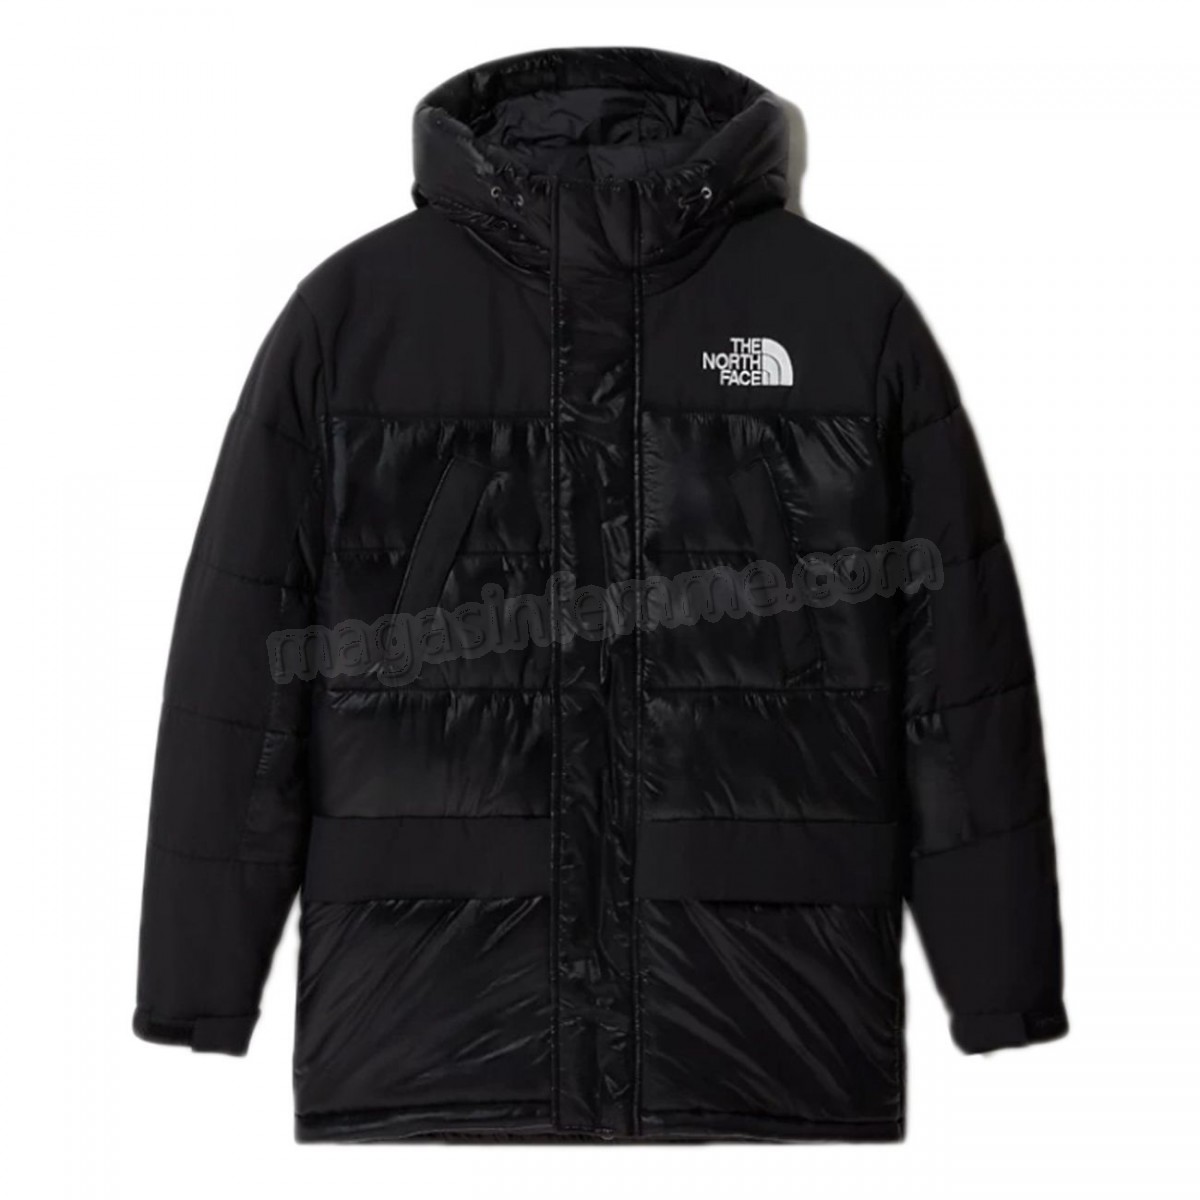 The North Face-mode homme THE NORTH FACE Himalayan Insulated Parka en solde - -4